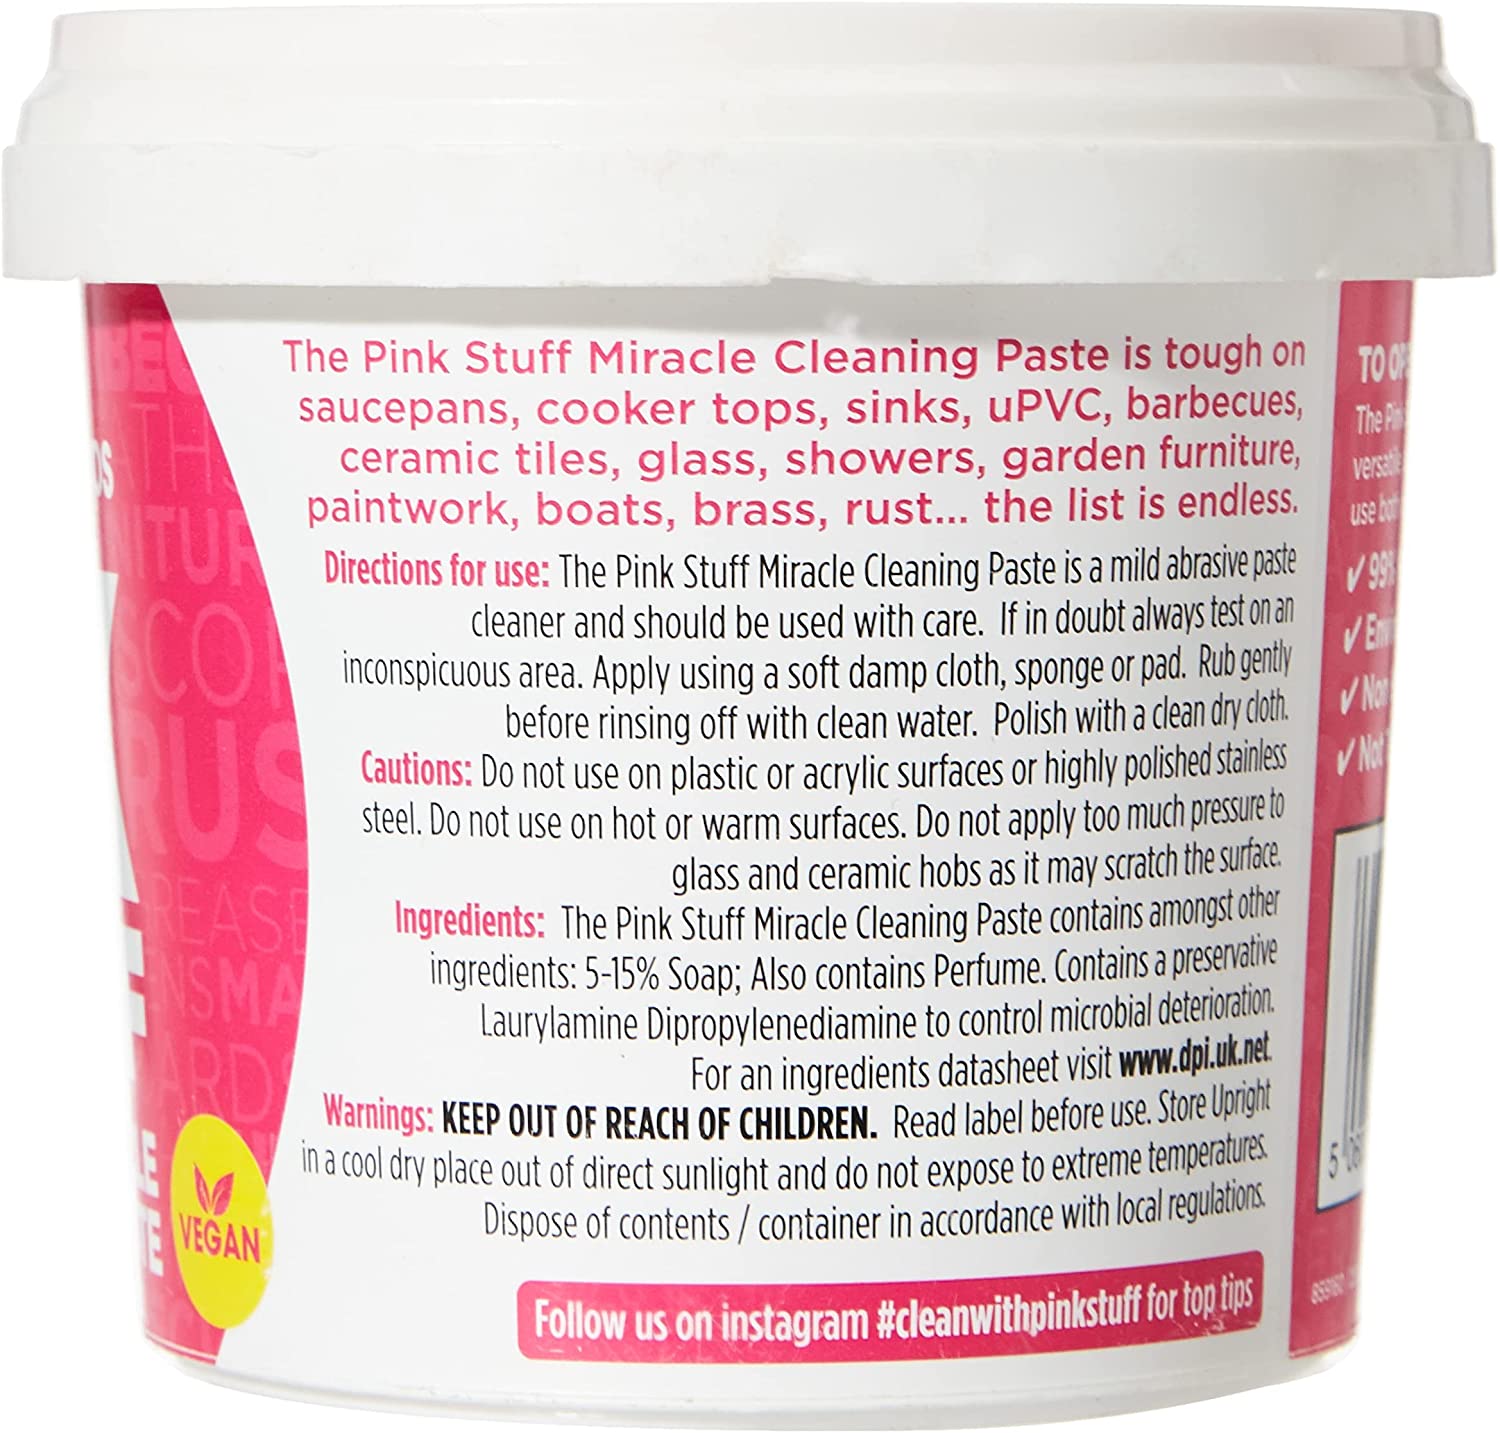 Stardrops - The Pink Stuff - The Miracle Cleaning Paste and Multi-Purpose  Spray Bundle (2 Cleaning Paste, 1 Multi-Purpose Spray)